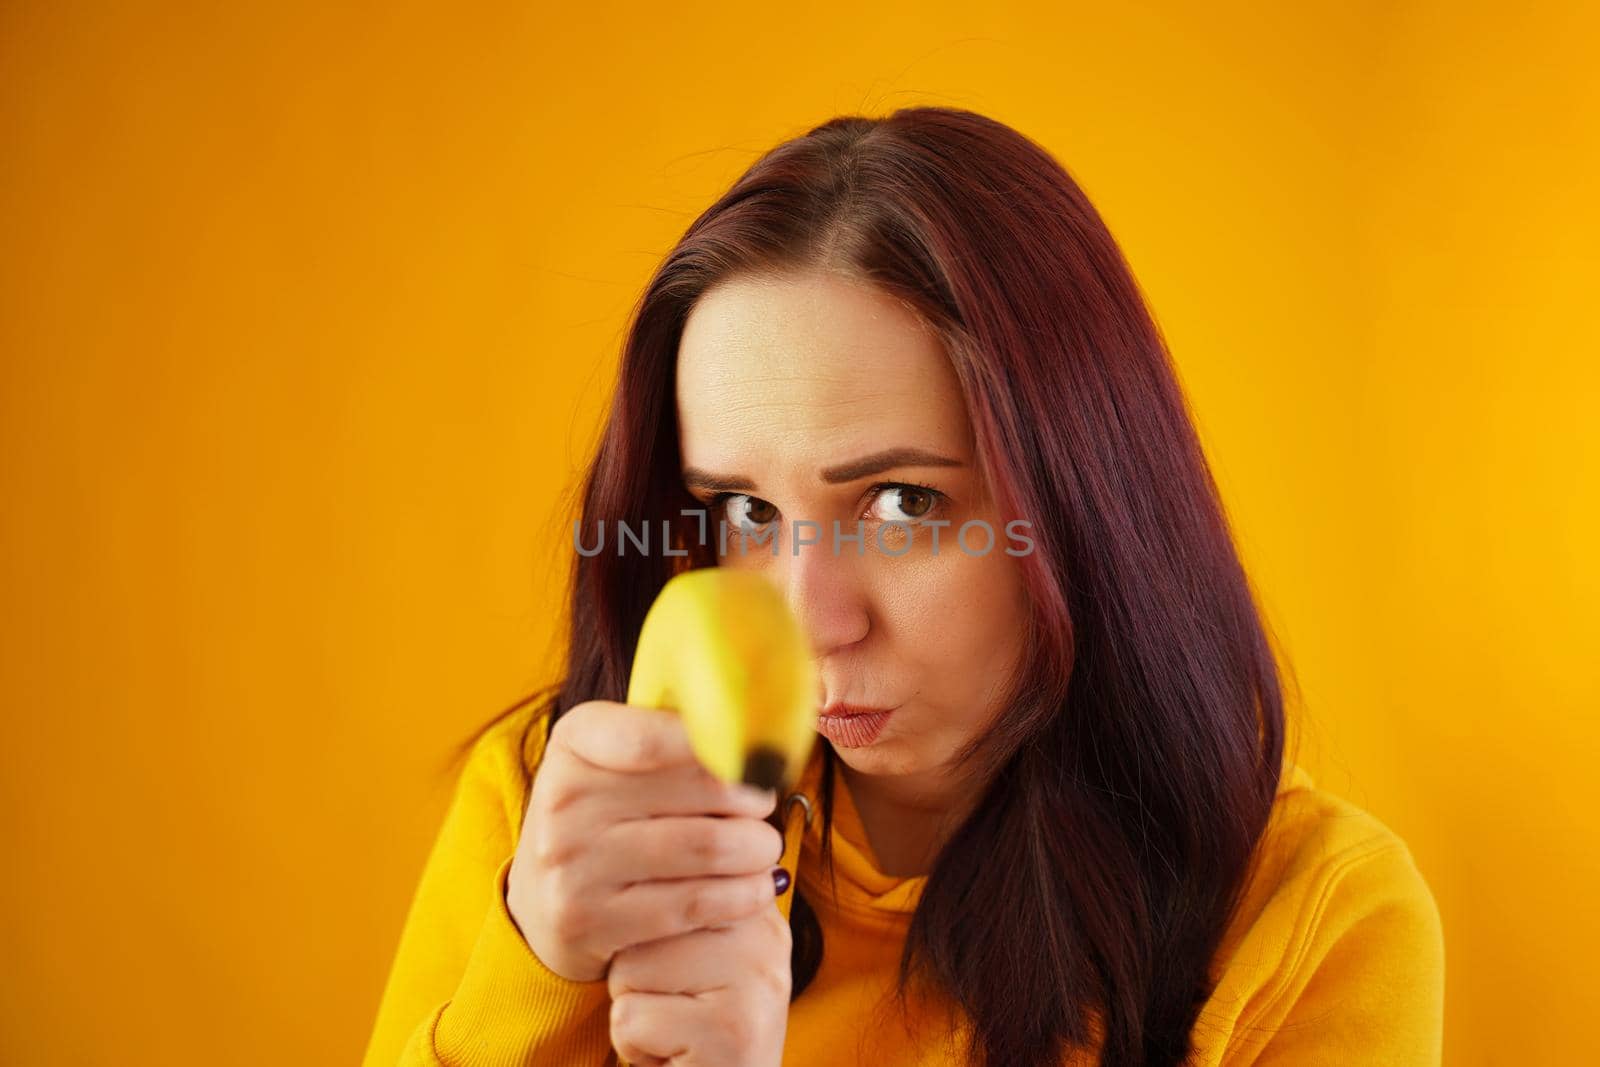 Portrait of young woman with banana on yellow background. Close up of female in yellow hoodie plays with fruit, imagining it as weapon